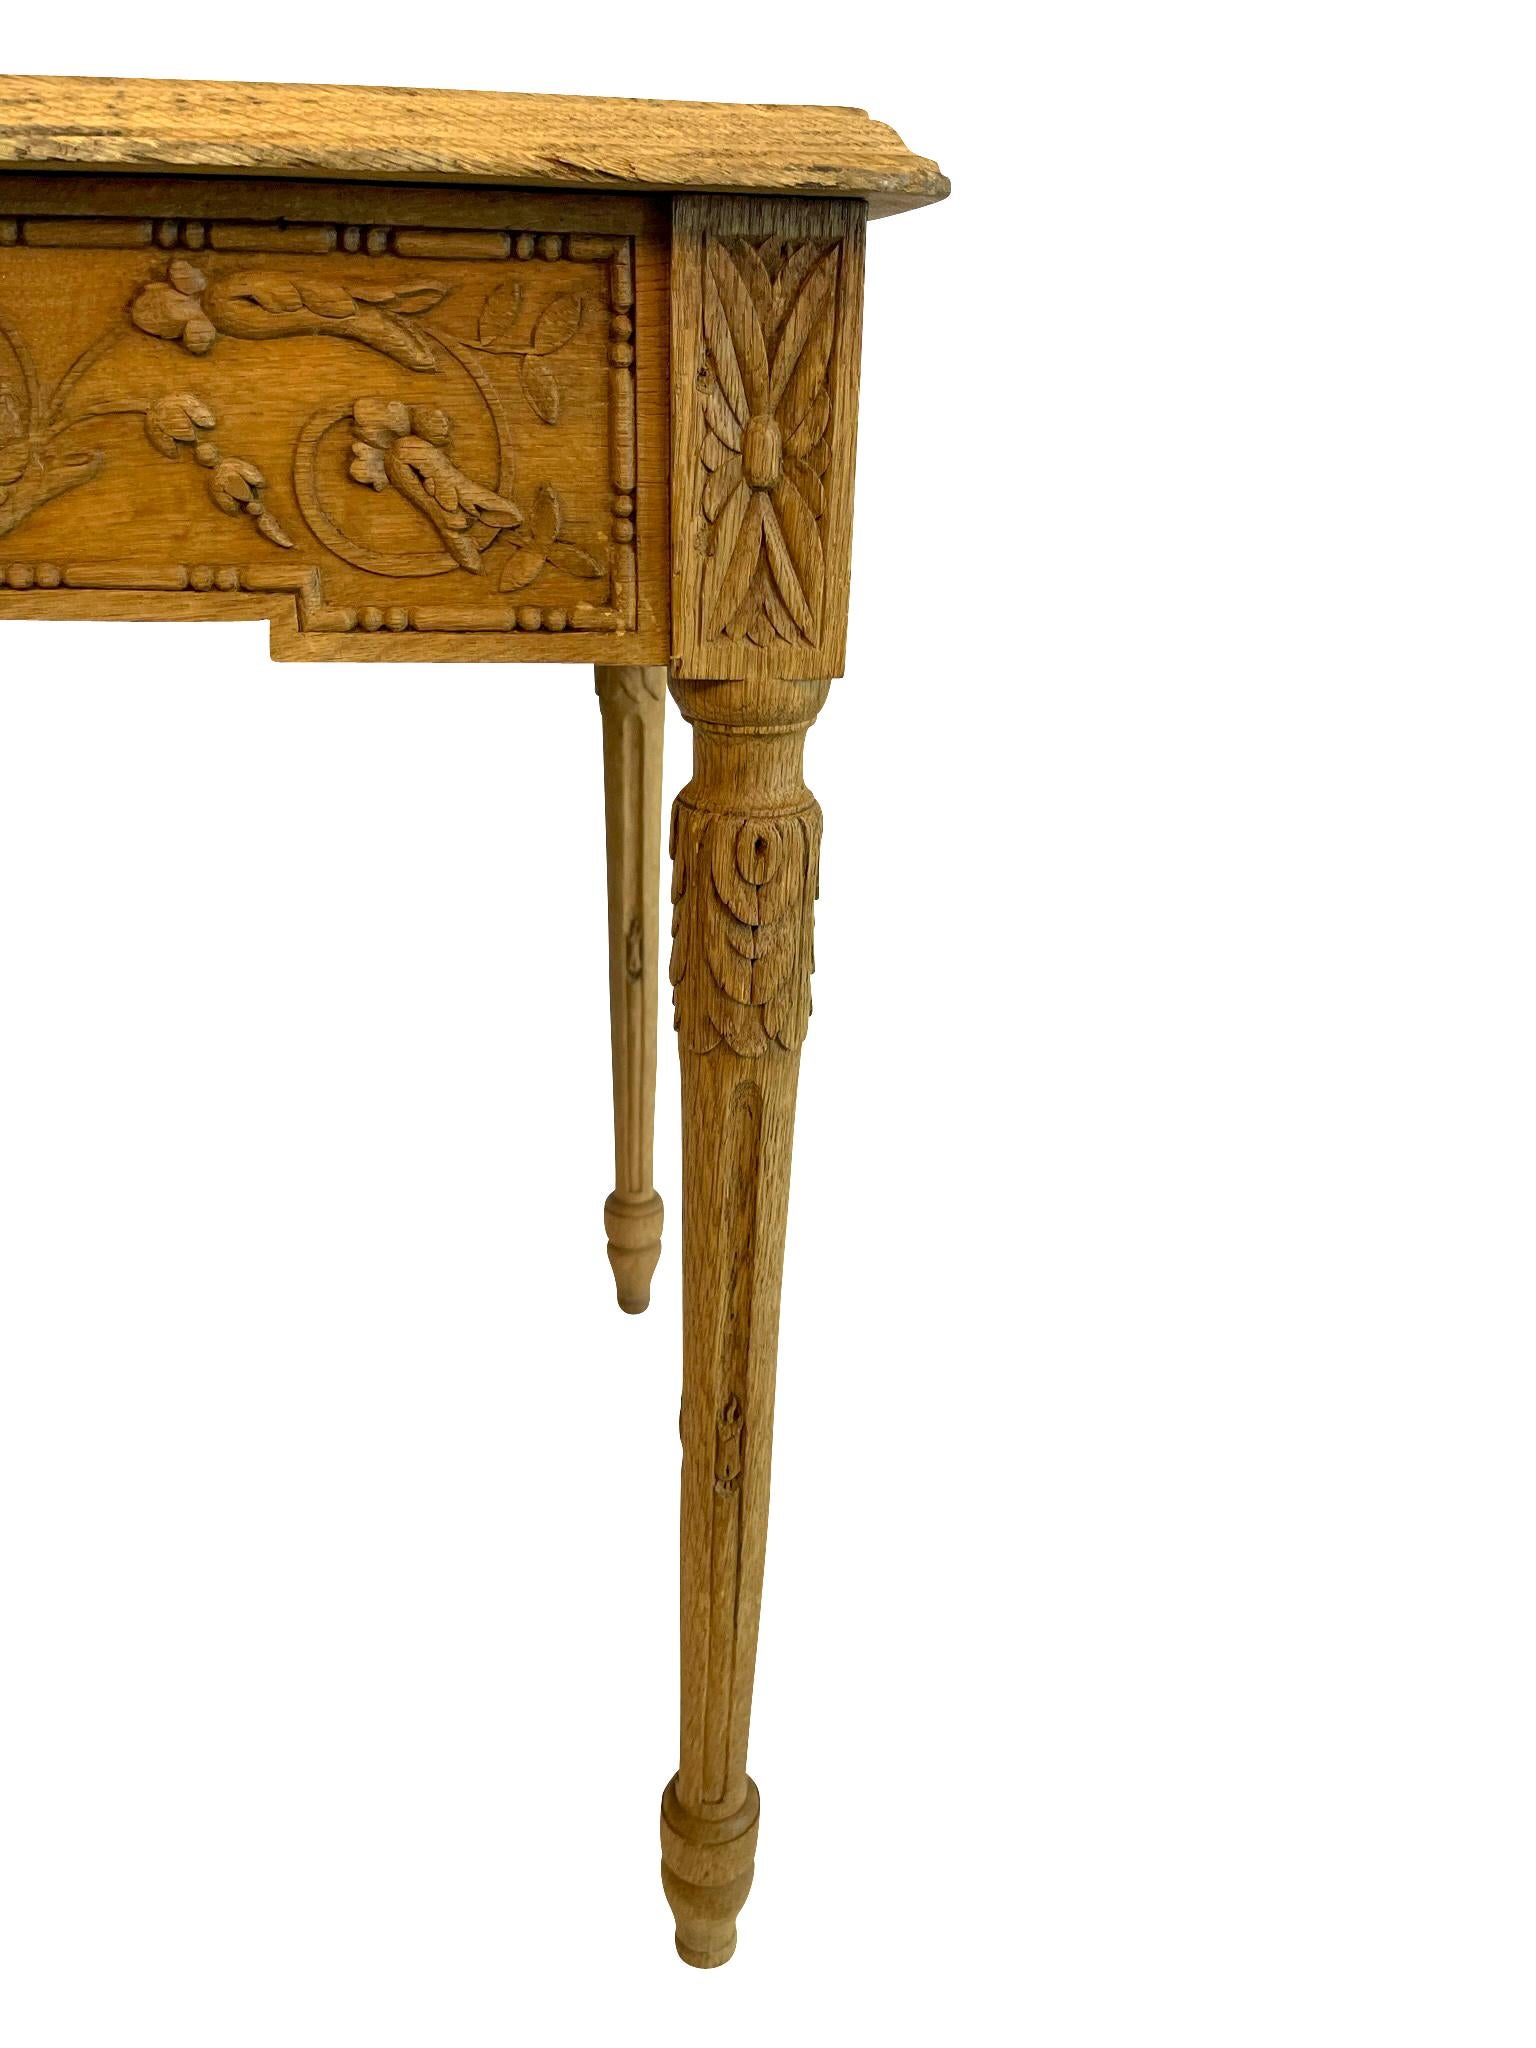 A lovely French Louis XVI bleached oak side table on tapered fluted legs with a carved apron of neoclassical design—Laurel wreaths in a foliate pattern with garlands of hanging ribbons and bows. The corners have the classic carved rosette design,